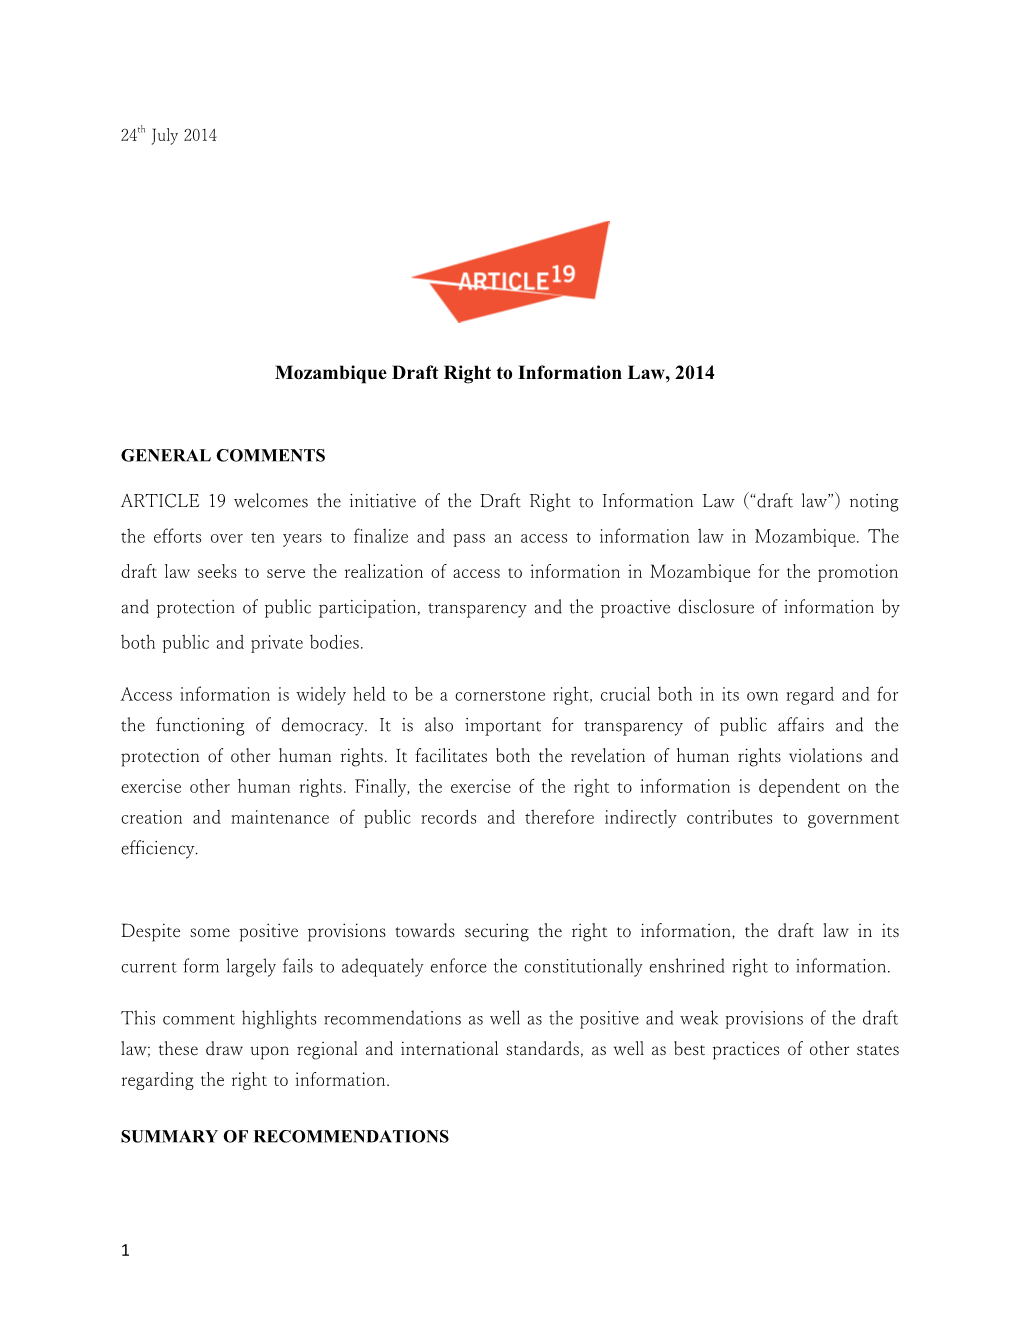 Mozambique Draft Right to Information Law, 2014